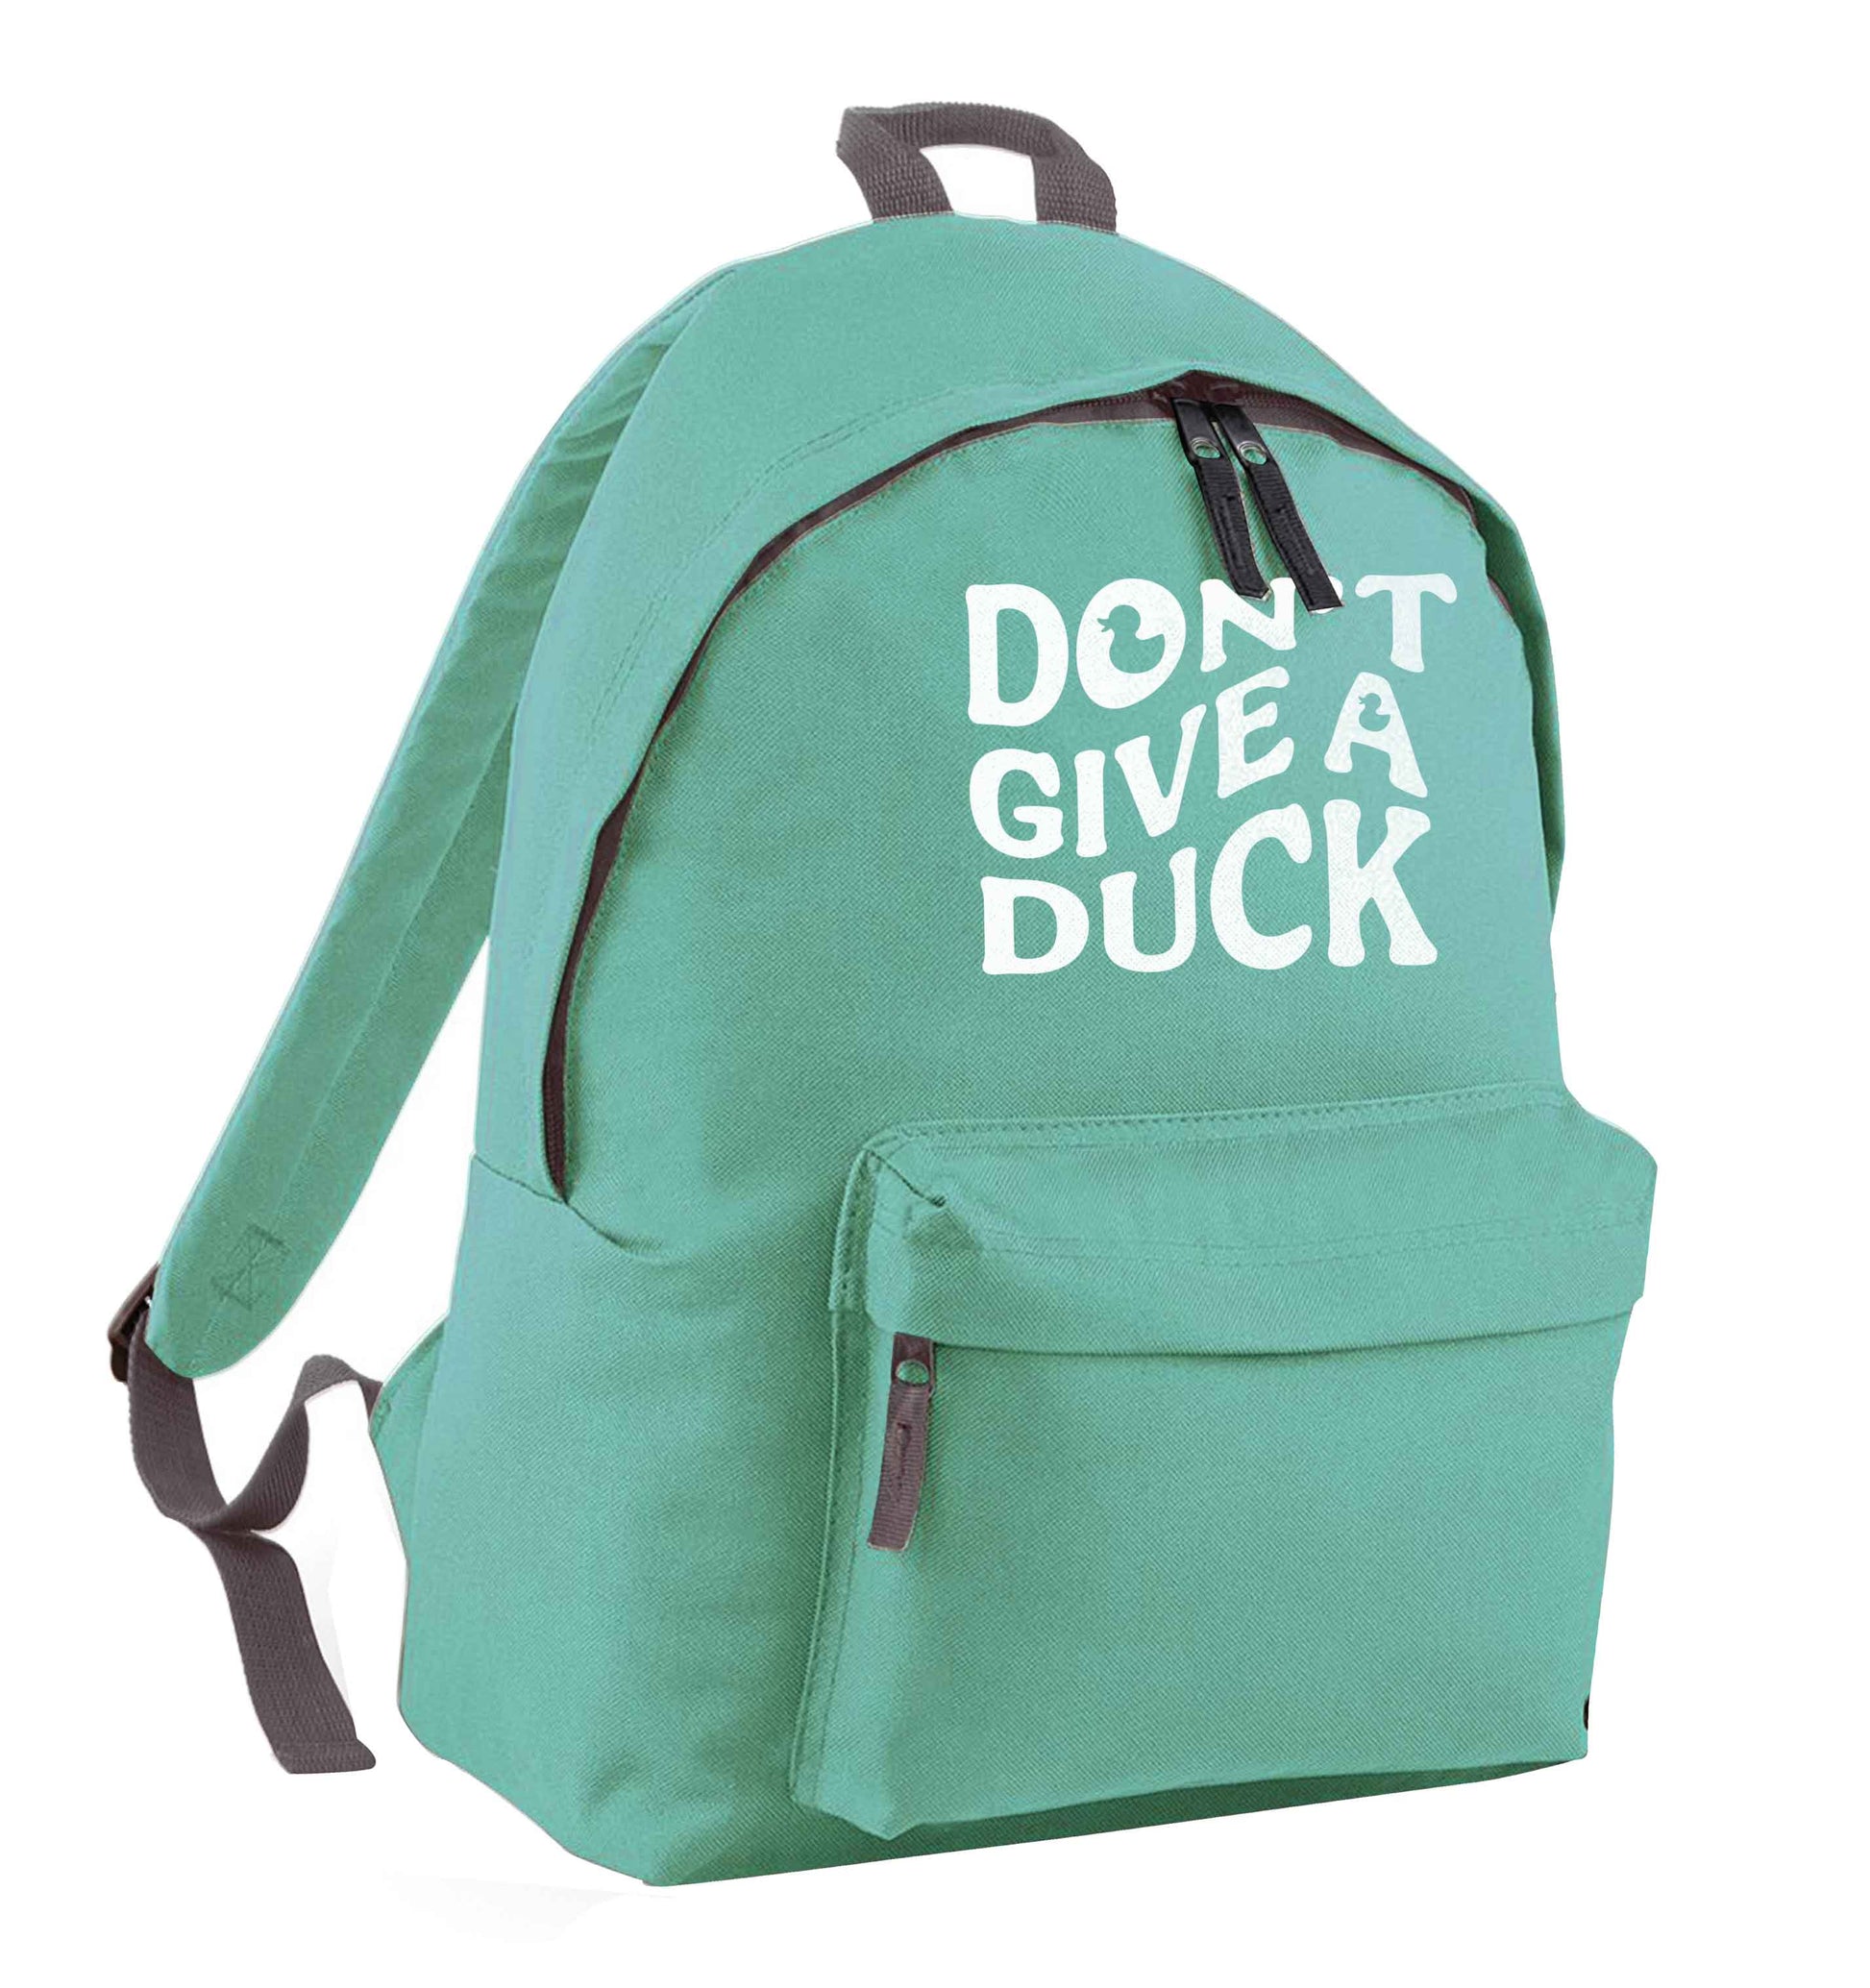 Don't give a duck mint adults backpack